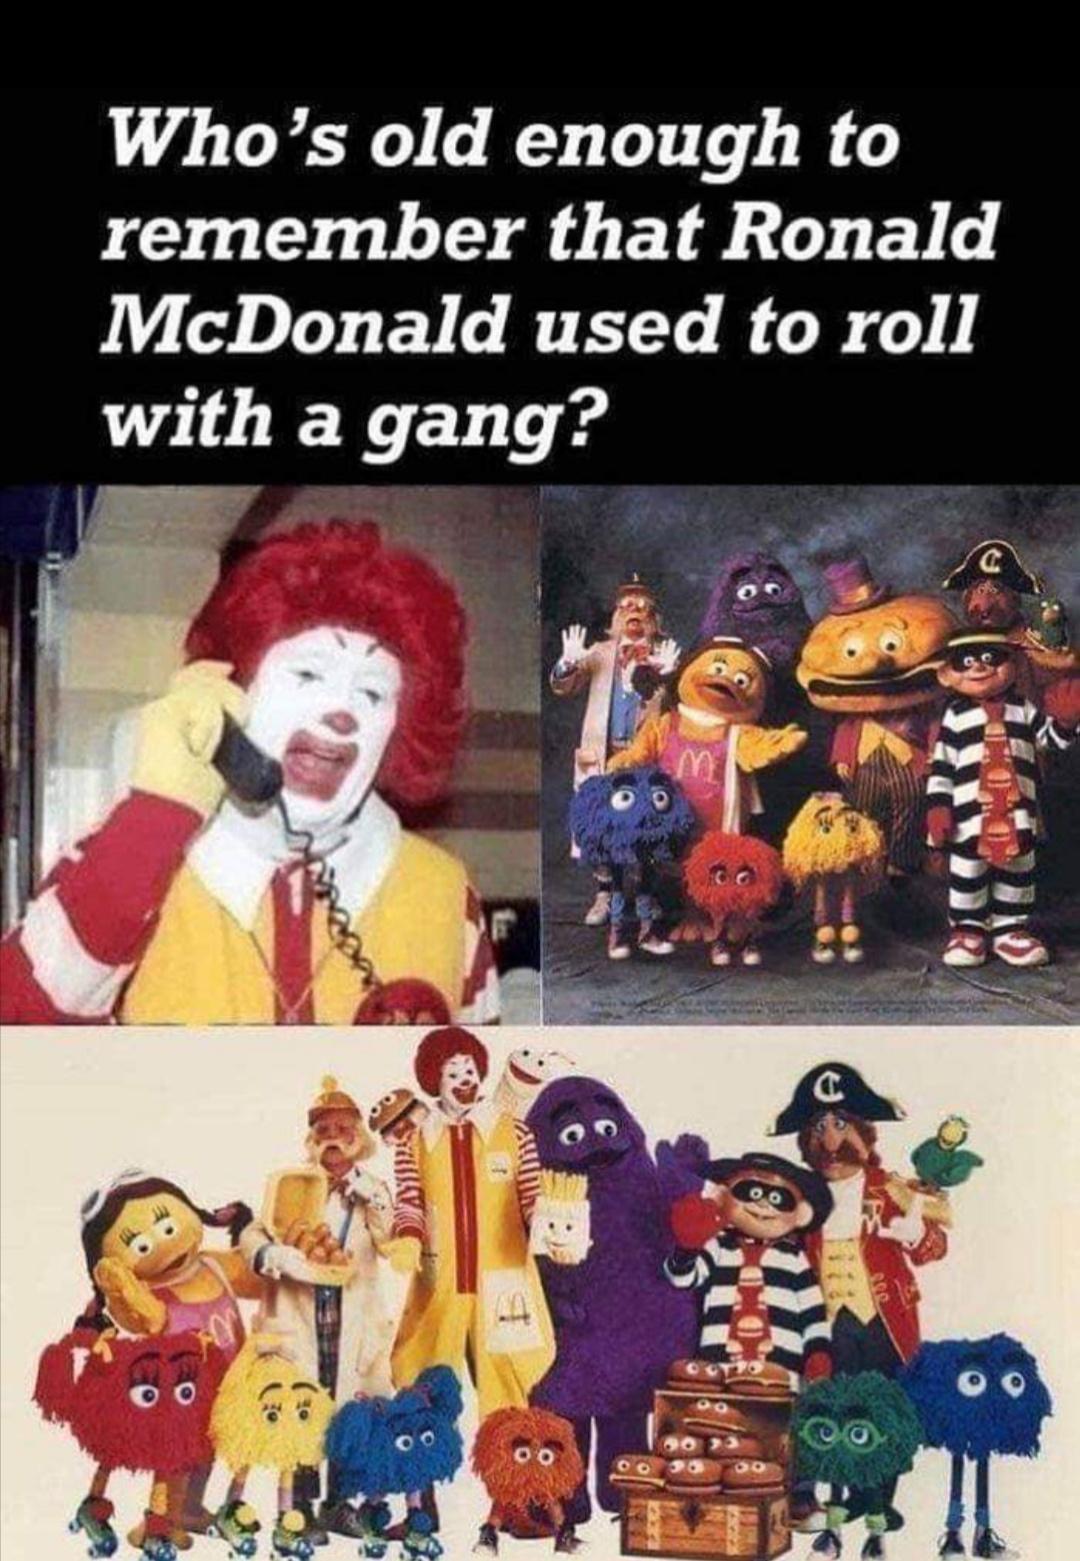 mcdonalds show - Who's old enough to remember that Ronald McDonald used to roll with a gang? Oo